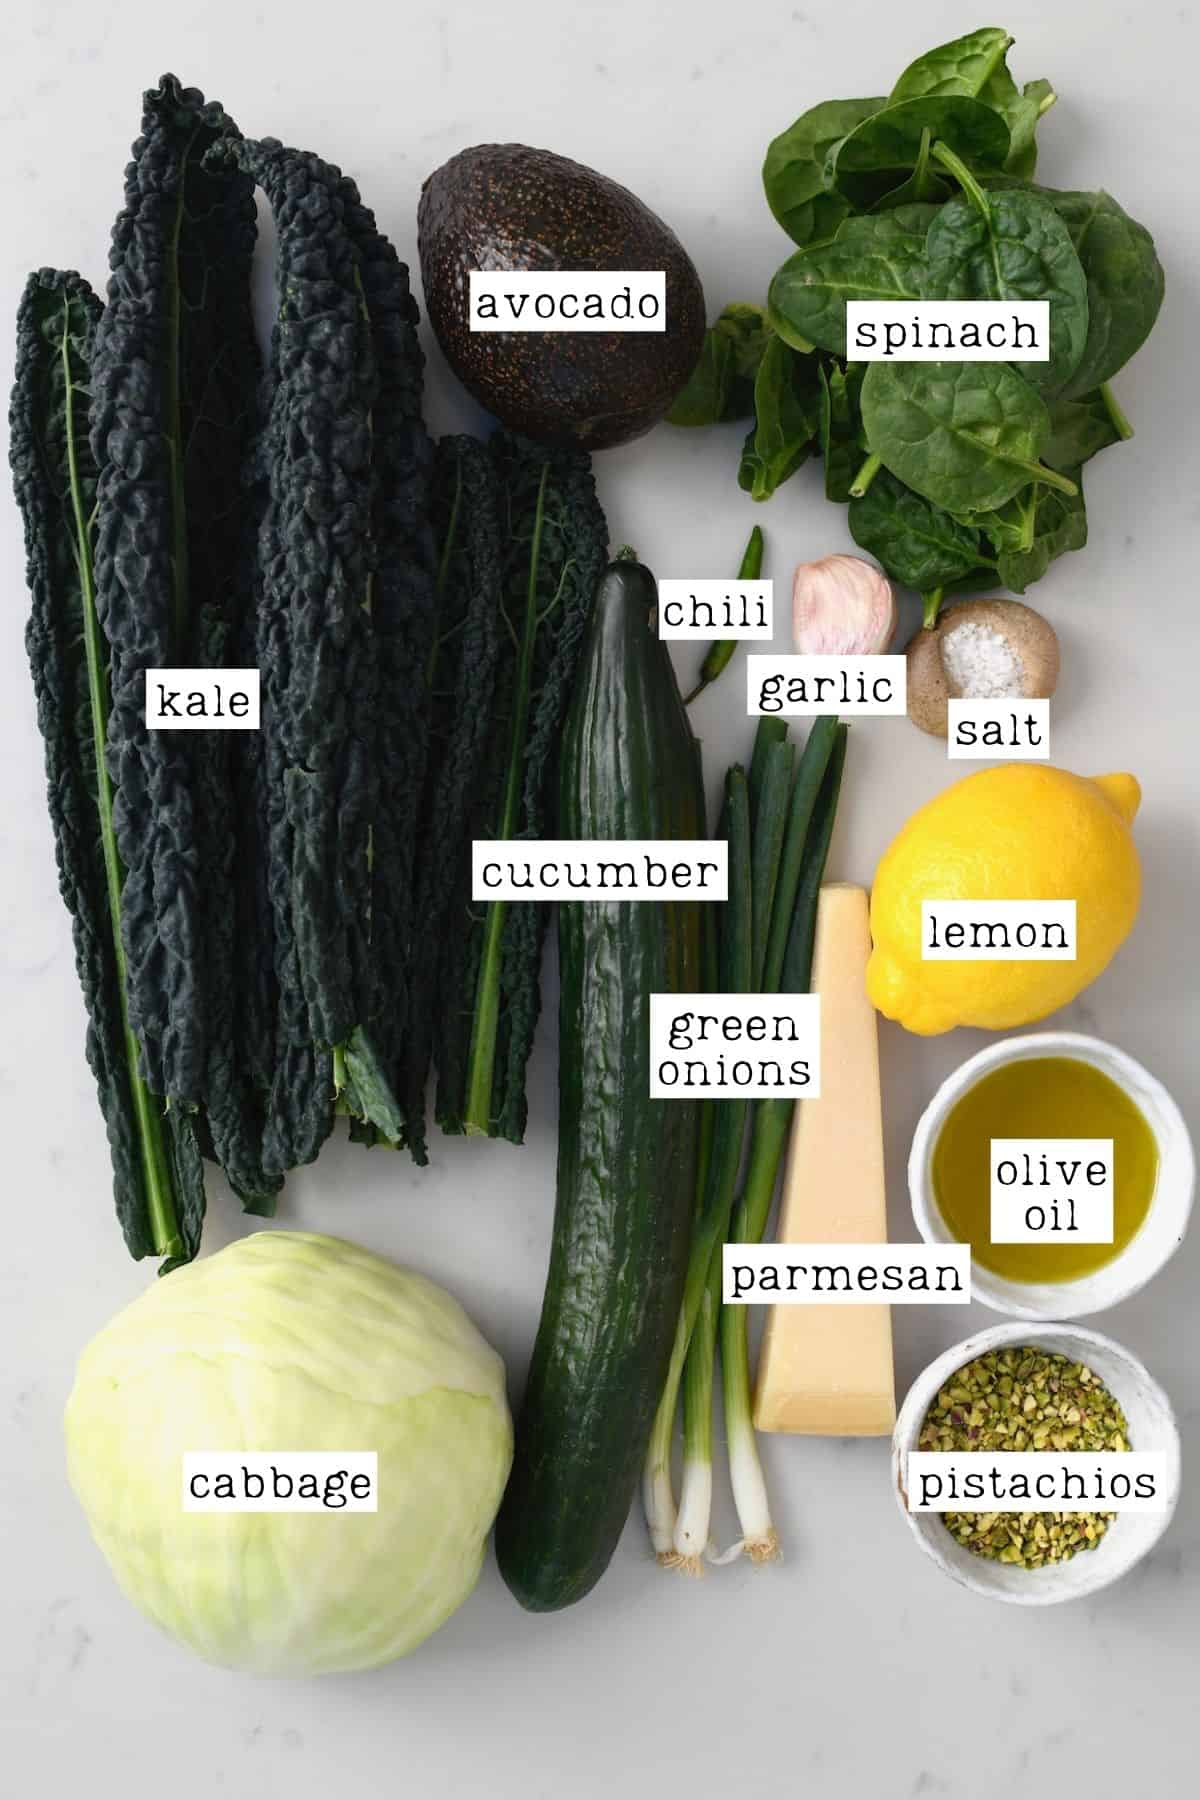 Ingredients for cucumber cabbage salad